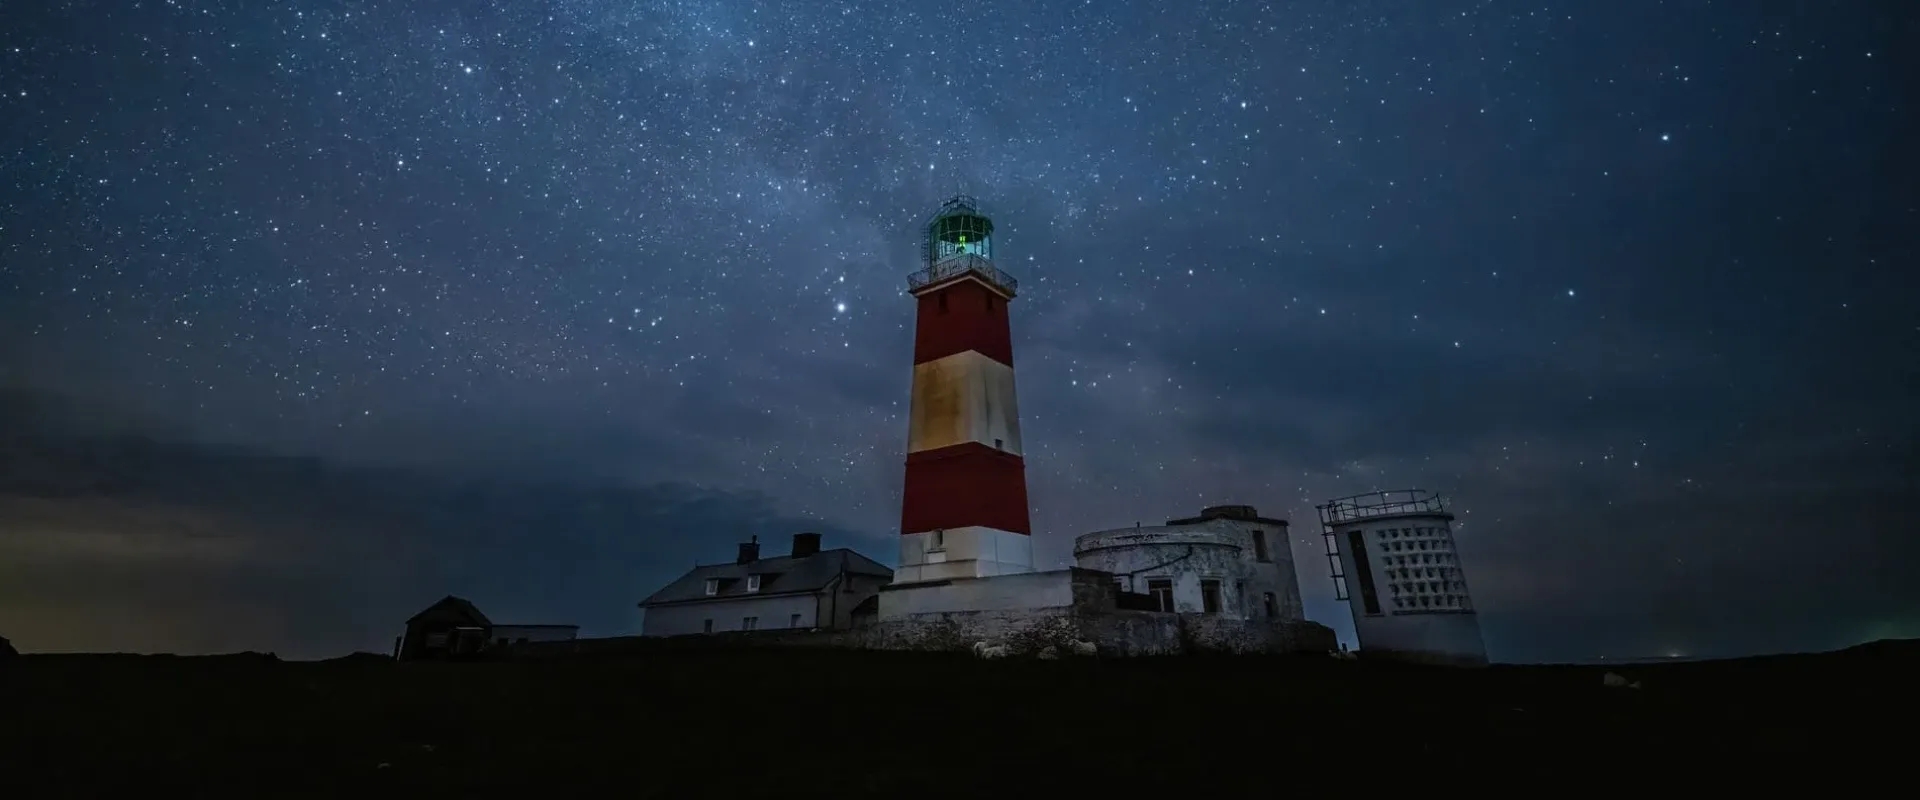 A lighthouse stands under the starry sky on Ynys Enlli in Wales